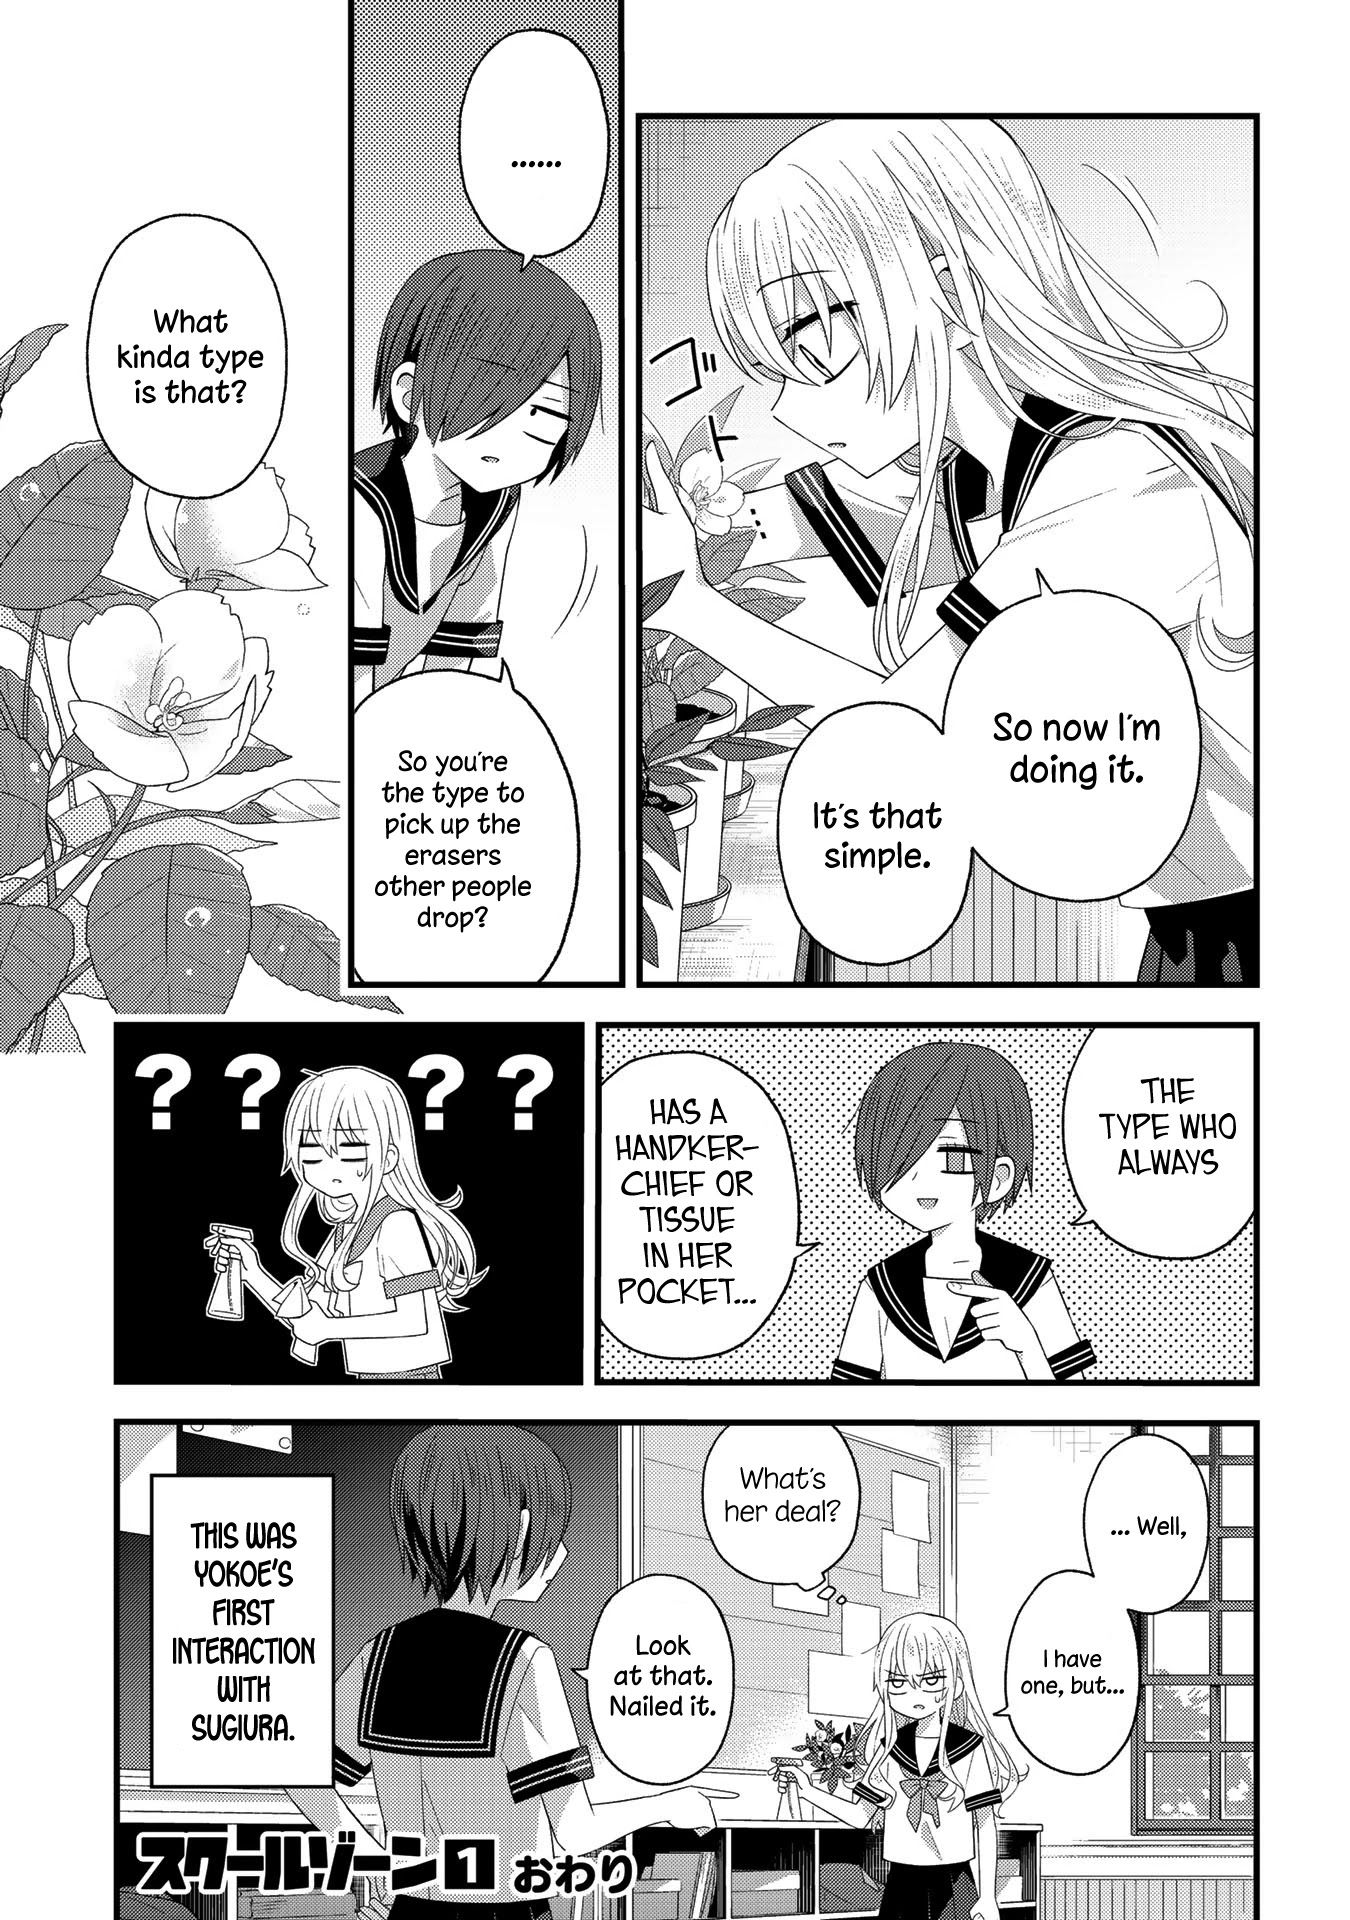 School Zone (Ningiyau) Chapter 29.3: Extra 3: What Kinda Type Is That? - Picture 3